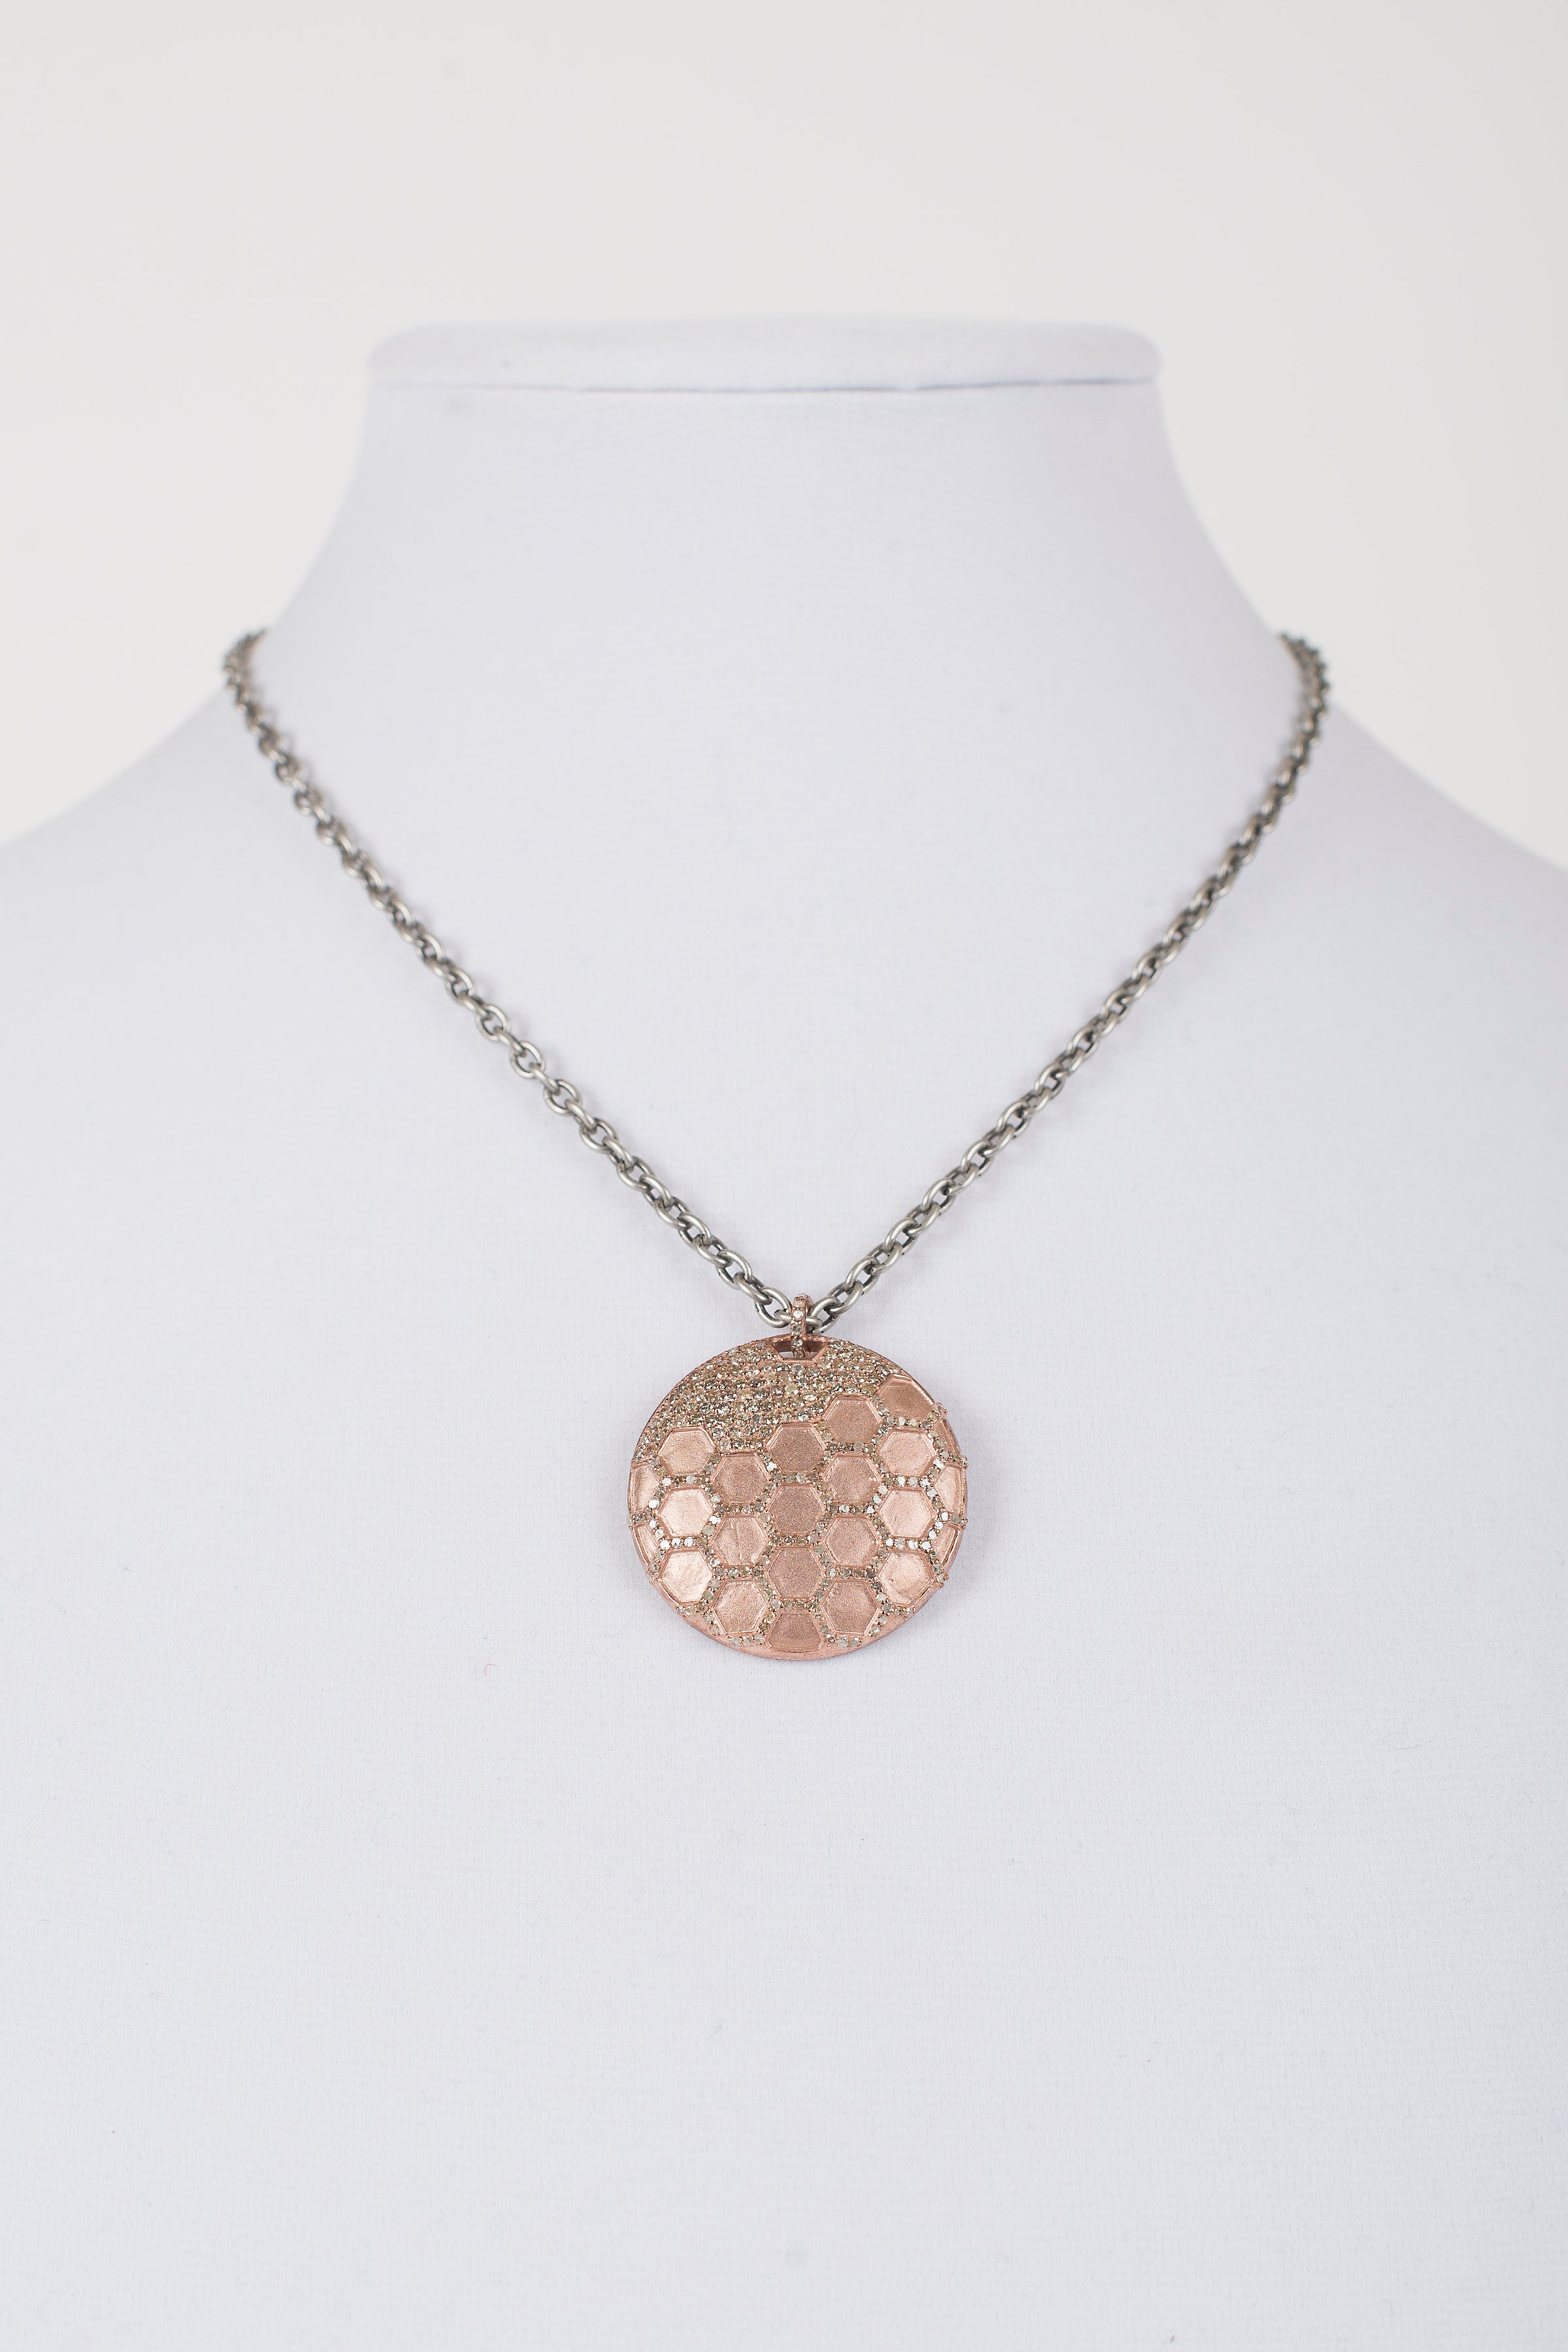 Brushed Rose Gold and Pave Diamond Pendant on Gunmetal Chain